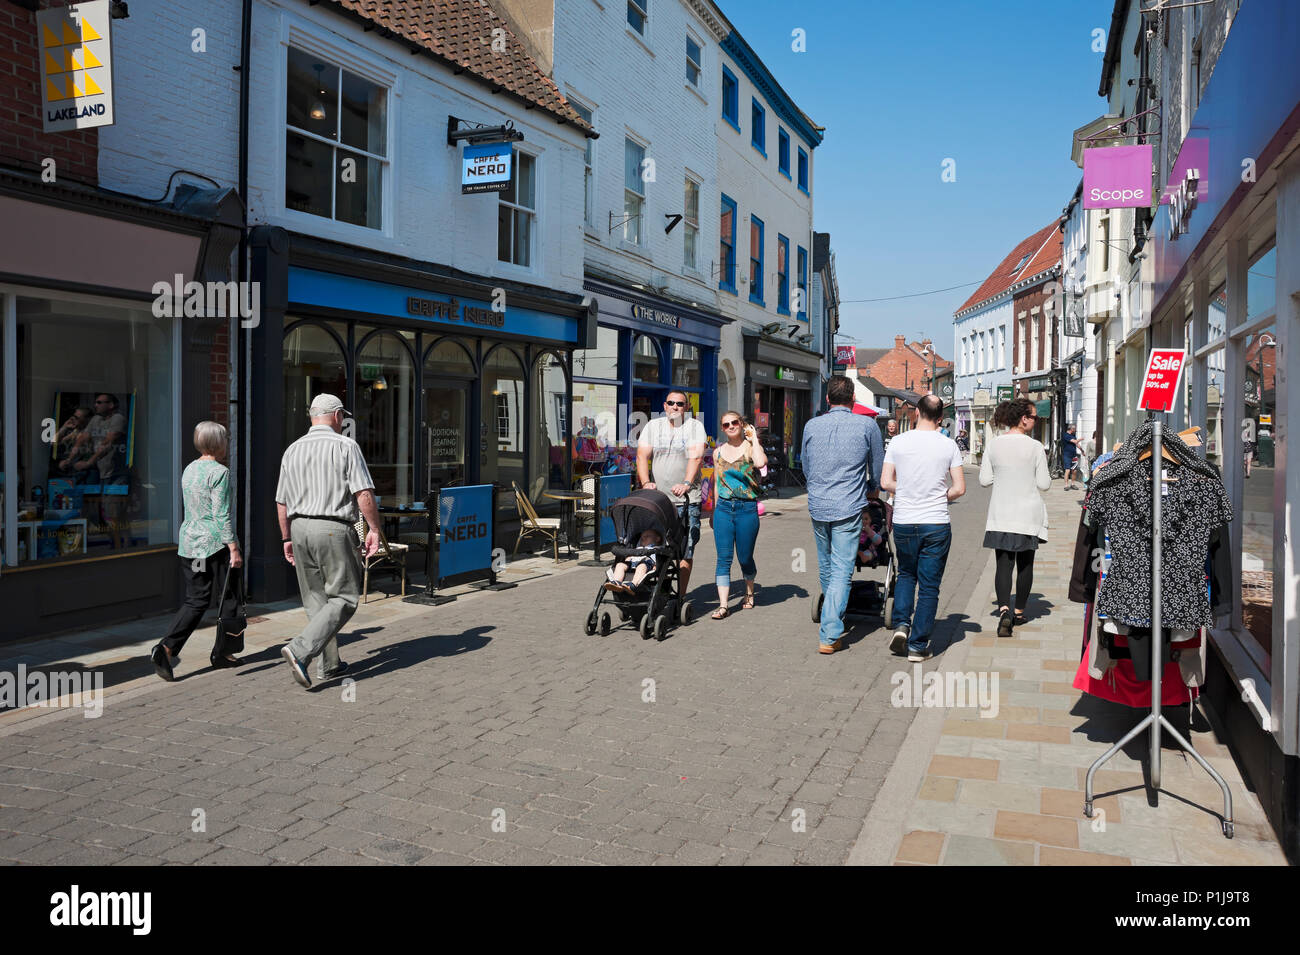 People shoppers shopping visiting the town centre high street shops stores in spring Beverley East Yorkshire England UK United Kingdom Great Britain Stock Photo